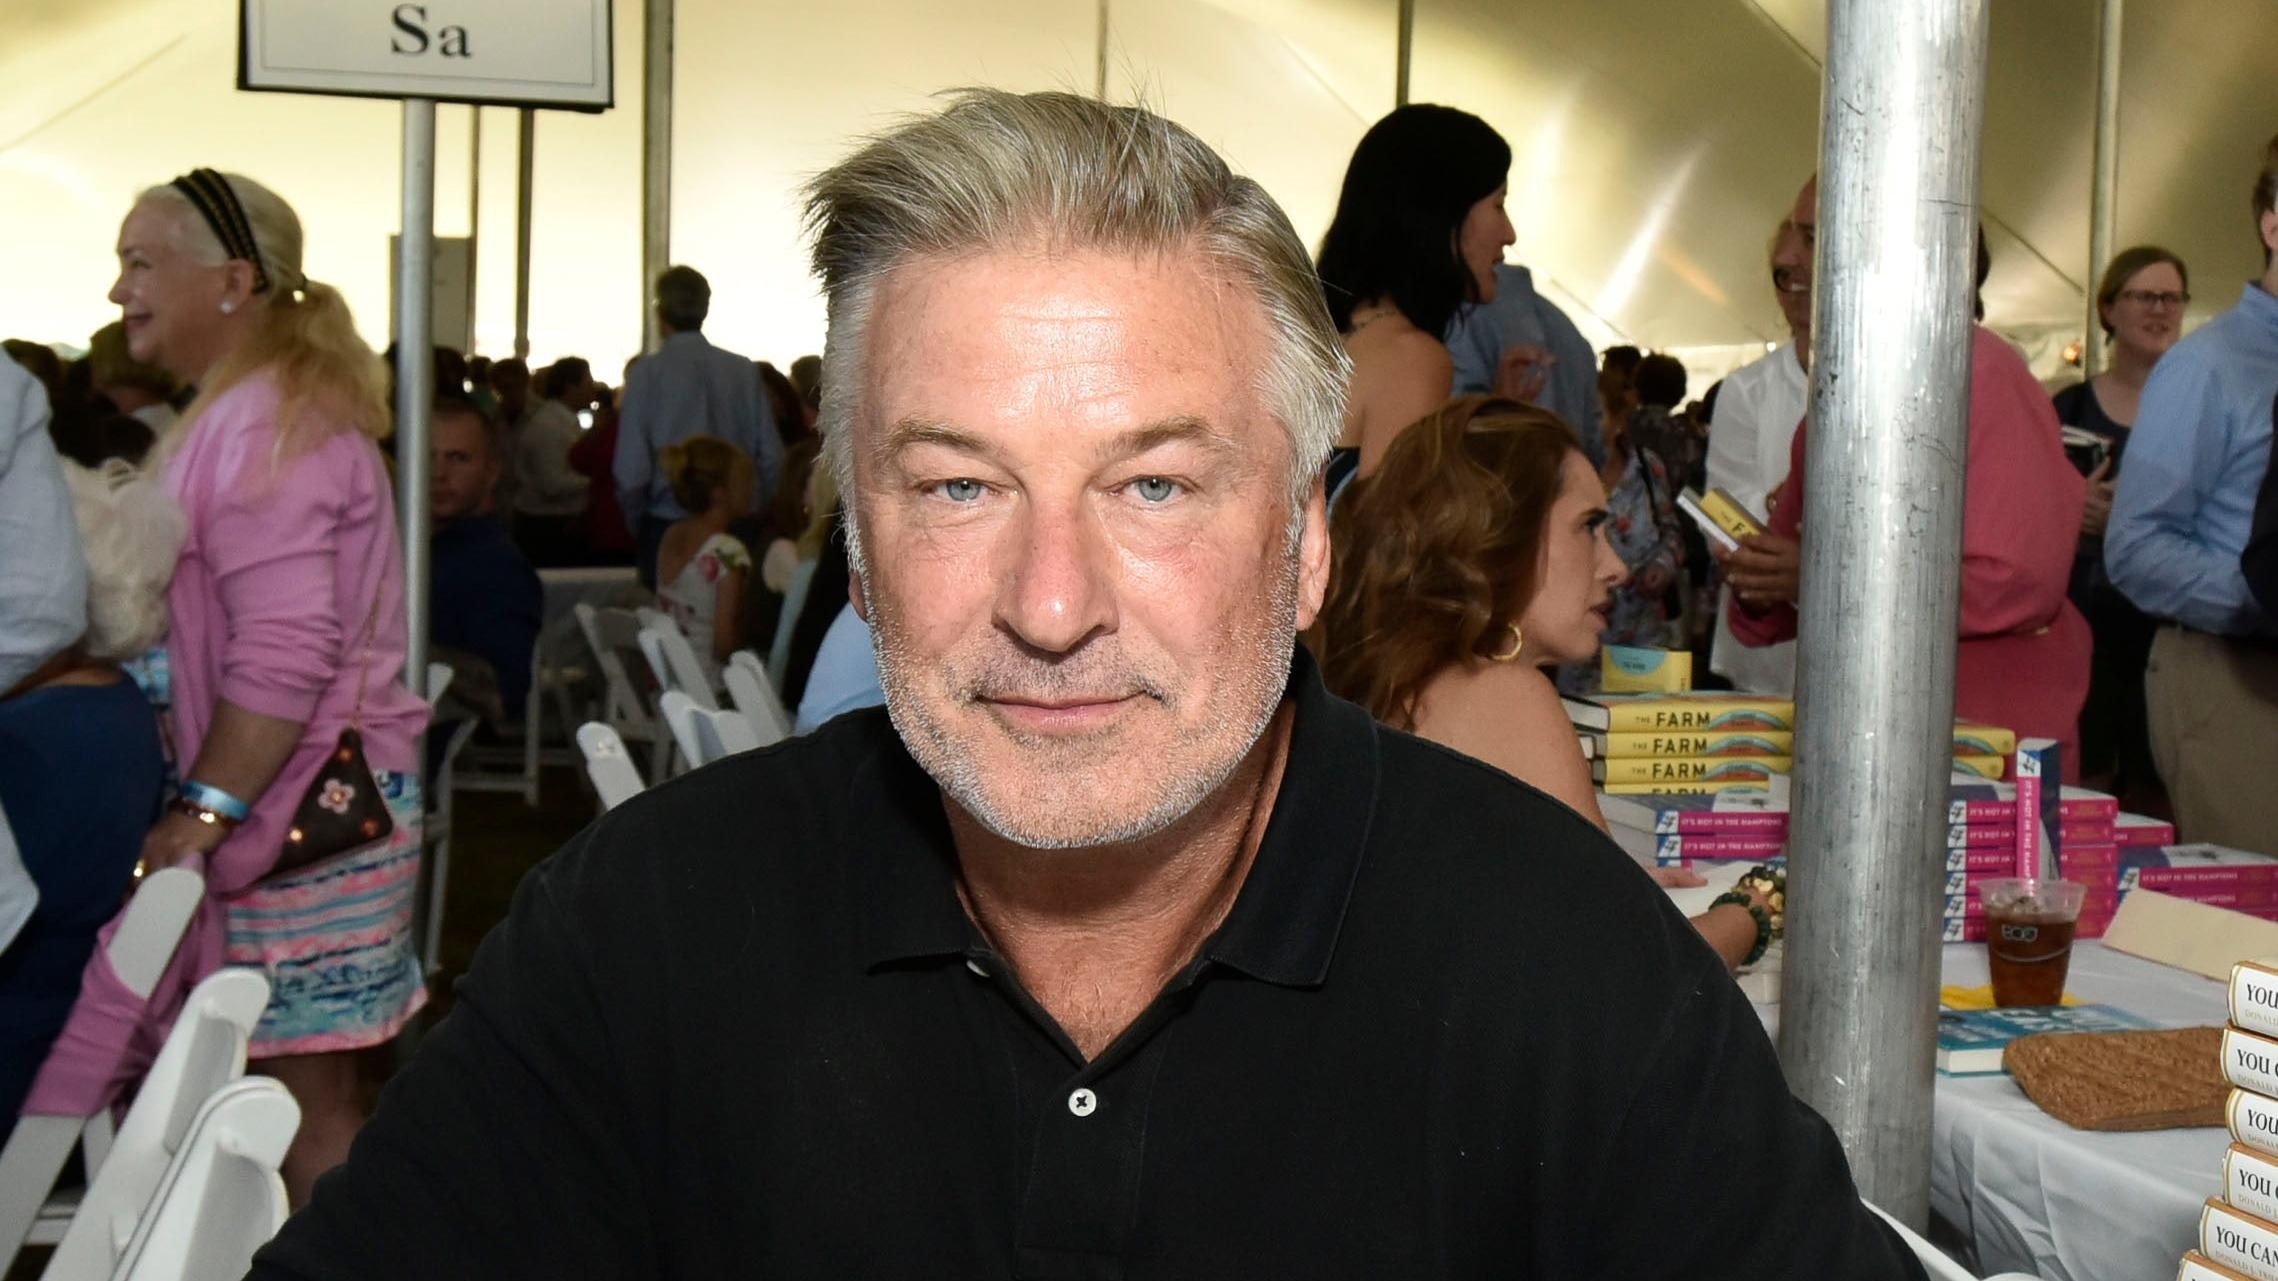 UPDATED: Prop gun fired by Alec Baldwin that killed crew member contained “live” bullet, IATSE says